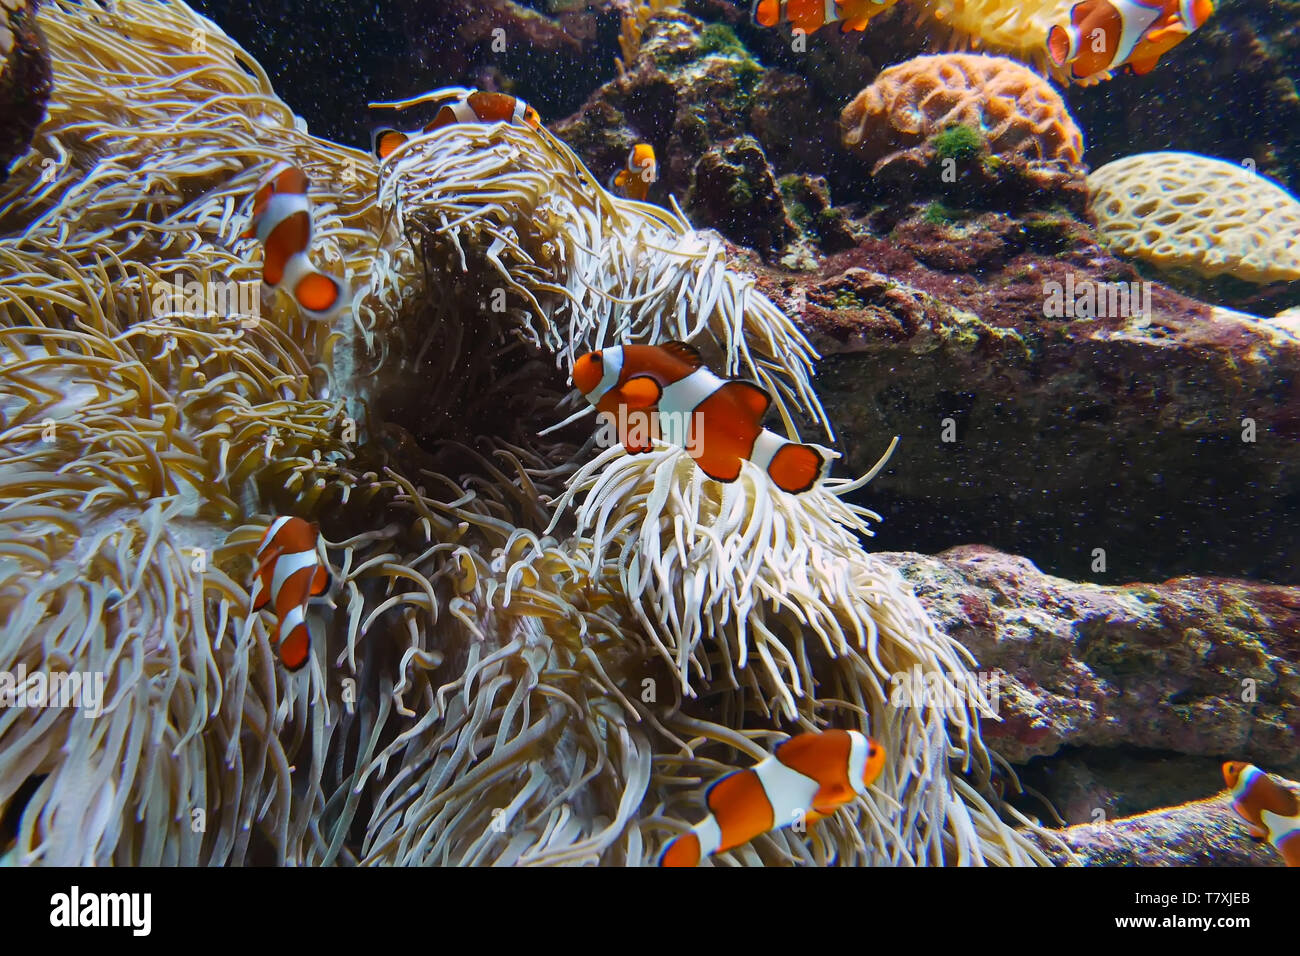 Clown fishes playing among anemone Stock Photo